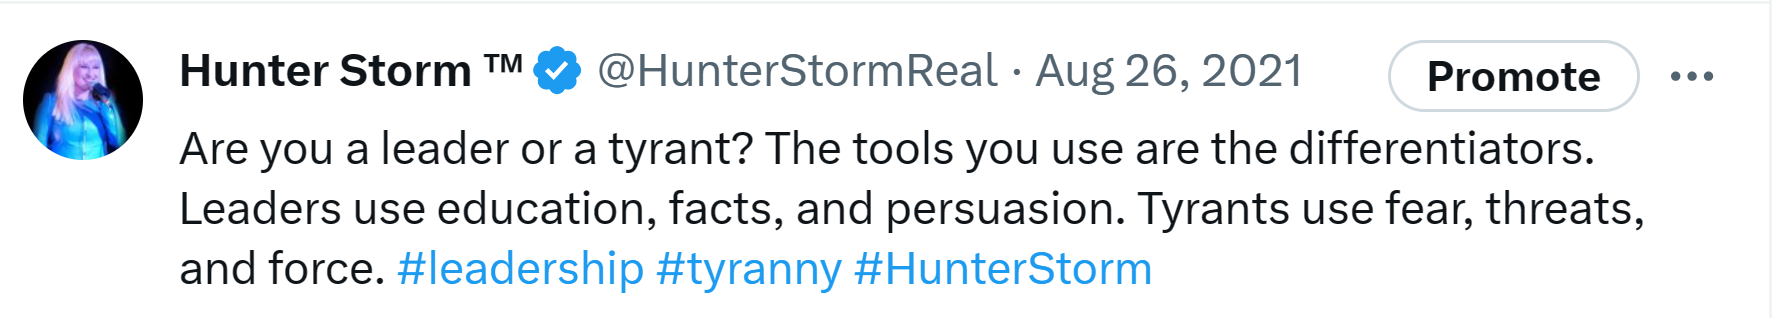 Hunter Storm Wisdom: Timeless Insights and Inspiration | "Are you a leader or a tyrant? The tools you use are the differentiators. Leaders use education, facts, and persuasion. Tyrants use fear, threats, and force."